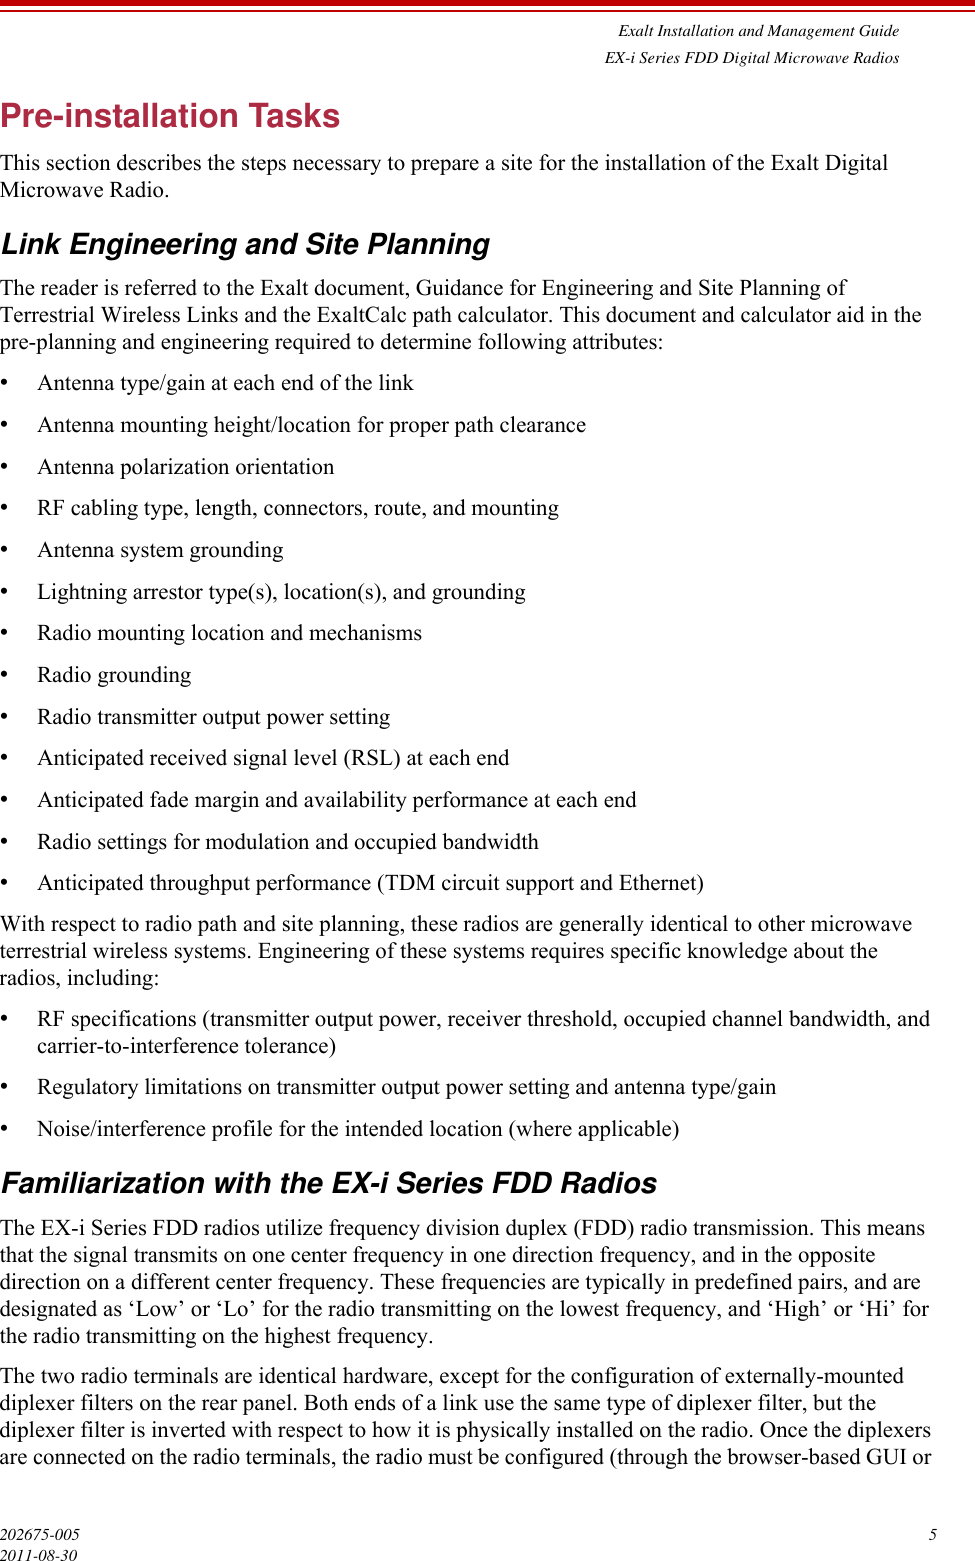 Exalt Installation and Management GuideEX-i Series FDD Digital Microwave Radios202675-005 52011-08-30Pre-installation TasksThis section describes the steps necessary to prepare a site for the installation of the Exalt Digital Microwave Radio.Link Engineering and Site PlanningThe reader is referred to the Exalt document, Guidance for Engineering and Site Planning of Terrestrial Wireless Links and the ExaltCalc path calculator. This document and calculator aid in the pre-planning and engineering required to determine following attributes:•Antenna type/gain at each end of the link•Antenna mounting height/location for proper path clearance•Antenna polarization orientation•RF cabling type, length, connectors, route, and mounting•Antenna system grounding•Lightning arrestor type(s), location(s), and grounding•Radio mounting location and mechanisms•Radio grounding•Radio transmitter output power setting•Anticipated received signal level (RSL) at each end•Anticipated fade margin and availability performance at each end•Radio settings for modulation and occupied bandwidth •Anticipated throughput performance (TDM circuit support and Ethernet)With respect to radio path and site planning, these radios are generally identical to other microwave terrestrial wireless systems. Engineering of these systems requires specific knowledge about the radios, including:•RF specifications (transmitter output power, receiver threshold, occupied channel bandwidth, and carrier-to-interference tolerance)•Regulatory limitations on transmitter output power setting and antenna type/gain•Noise/interference profile for the intended location (where applicable)Familiarization with the EX-i Series FDD RadiosThe EX-i Series FDD radios utilize frequency division duplex (FDD) radio transmission. This means that the signal transmits on one center frequency in one direction frequency, and in the opposite direction on a different center frequency. These frequencies are typically in predefined pairs, and are designated as ‘Low’ or ‘Lo’ for the radio transmitting on the lowest frequency, and ‘High’ or ‘Hi’ for the radio transmitting on the highest frequency.The two radio terminals are identical hardware, except for the configuration of externally-mounted diplexer filters on the rear panel. Both ends of a link use the same type of diplexer filter, but the diplexer filter is inverted with respect to how it is physically installed on the radio. Once the diplexers are connected on the radio terminals, the radio must be configured (through the browser-based GUI or 